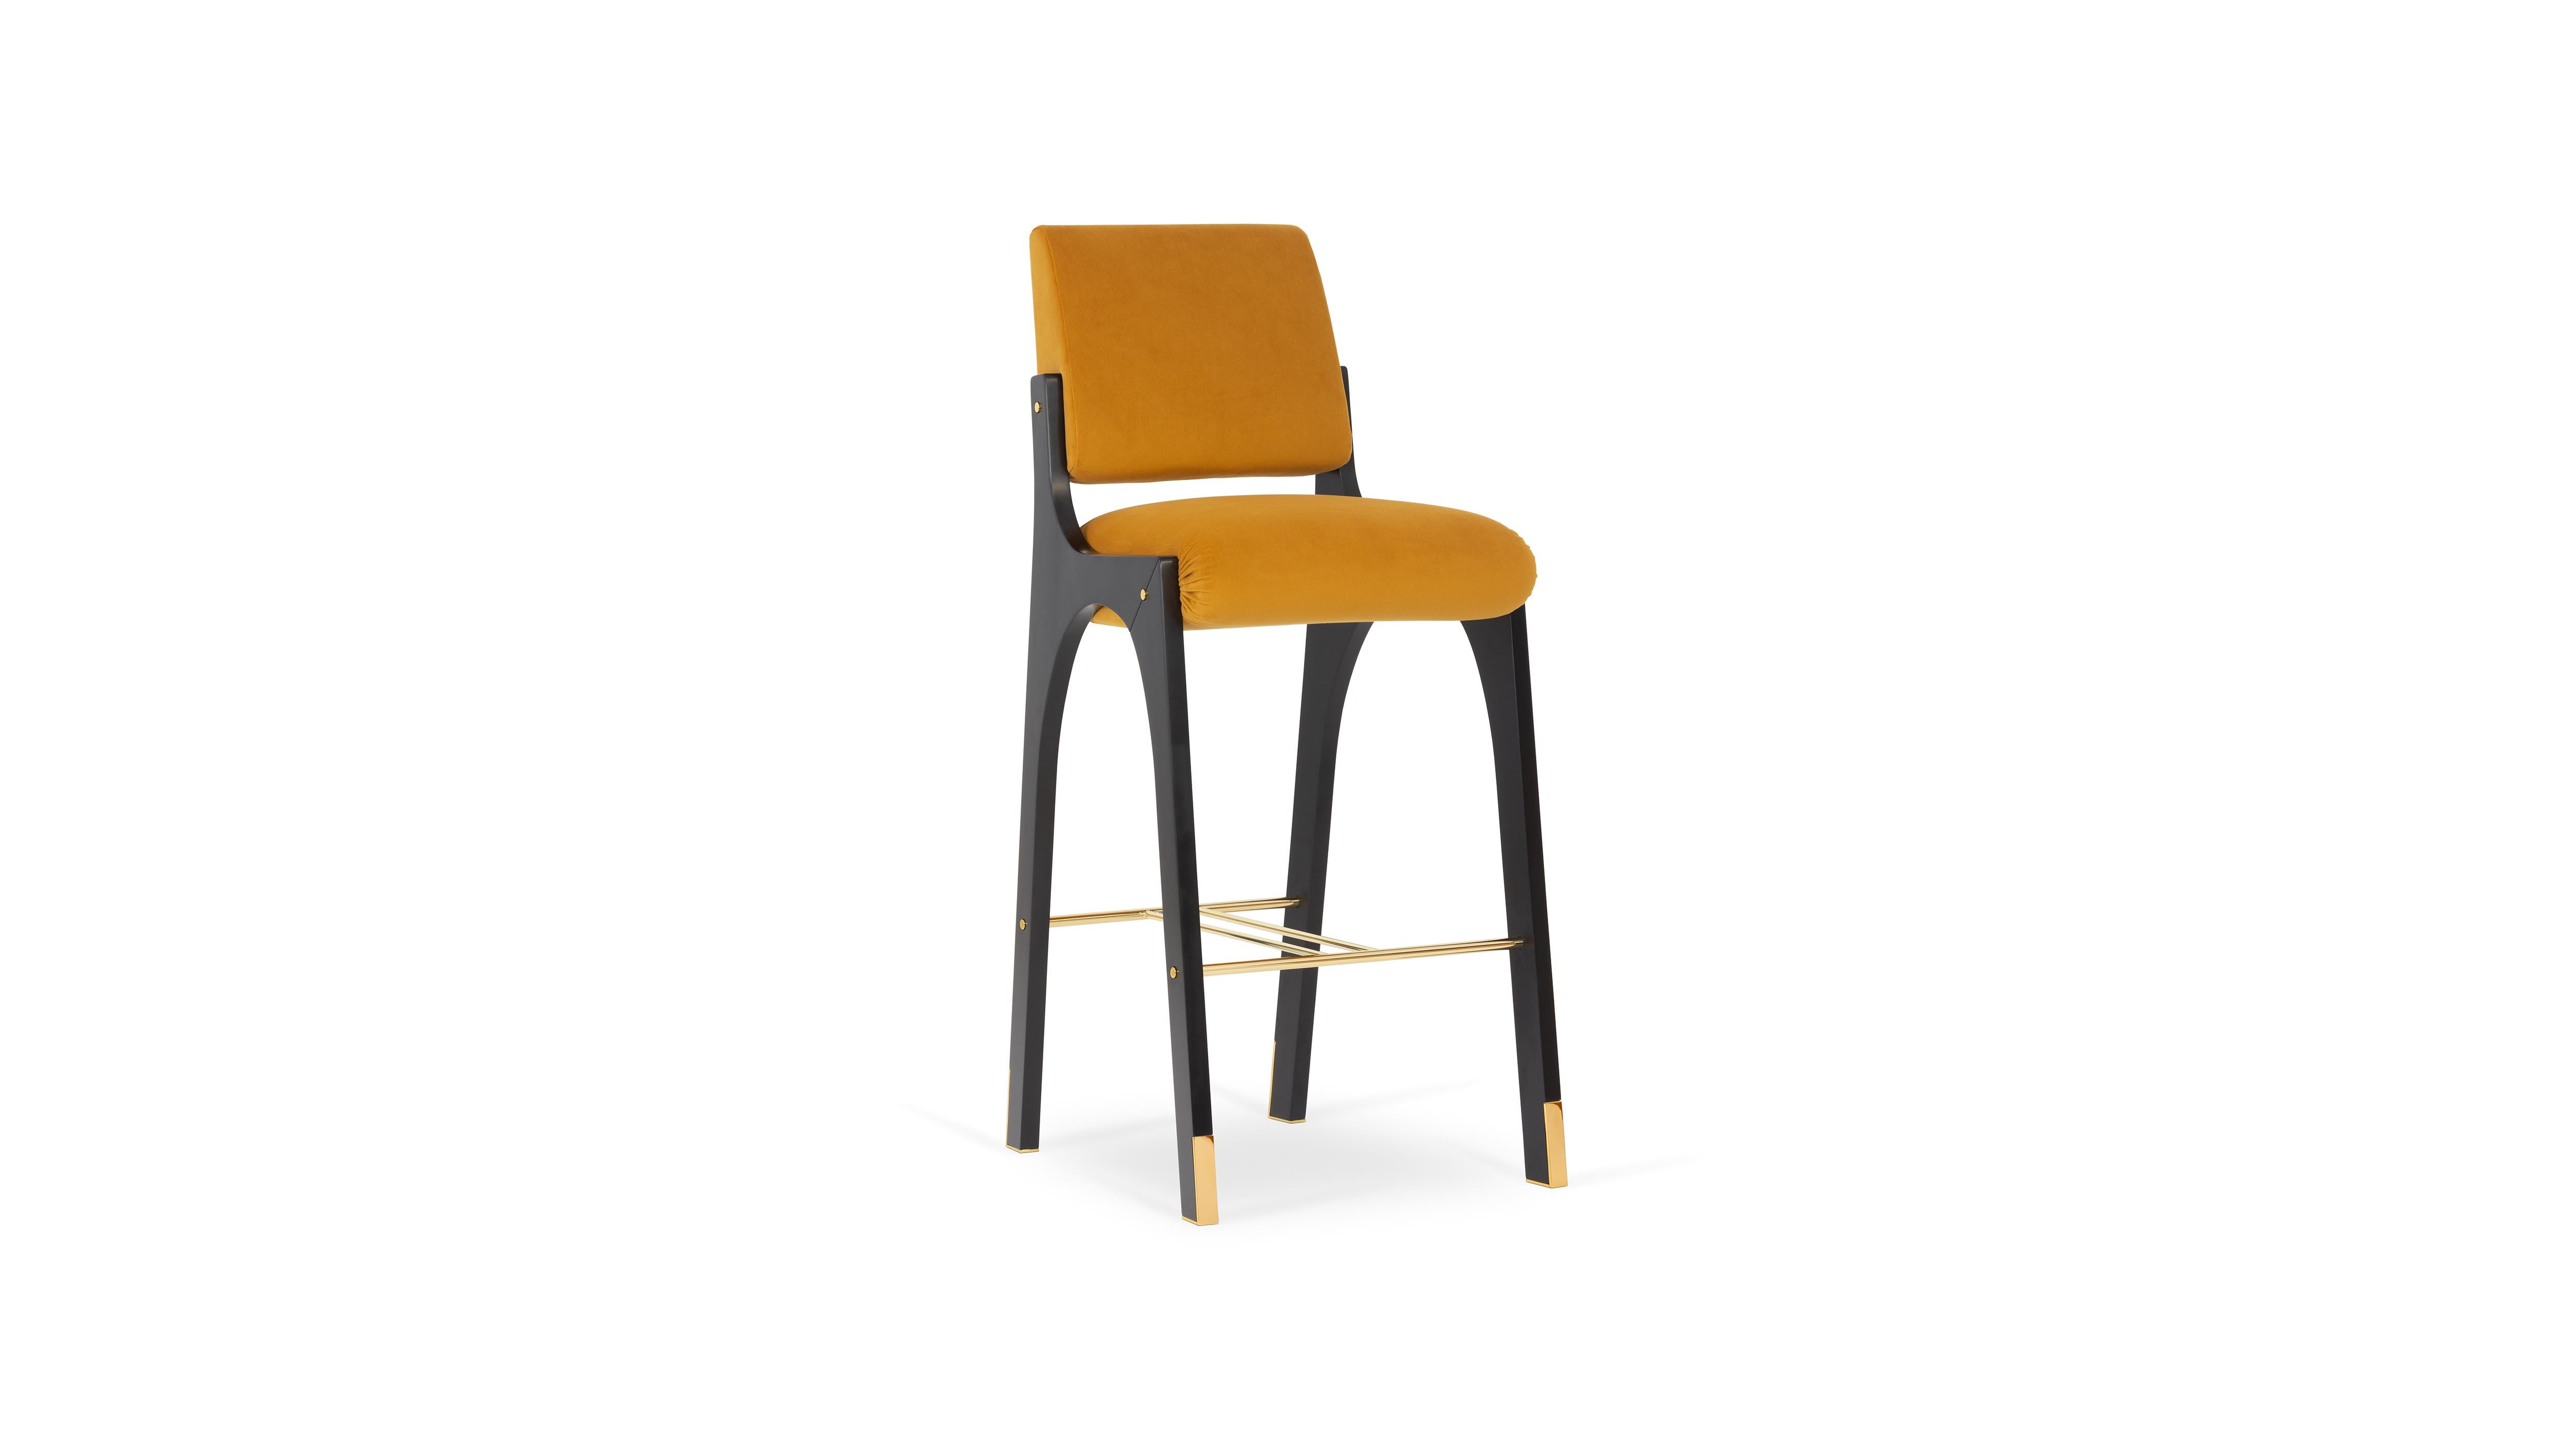 Arches Bar Stool II by InsidherLand
Dimensions: D 57 x W 50 x H 112 cm.
Materials: Black lacquered wood, polished brass, InsidherLand Smooth Velvet Ref. SMV 13 fabric.
11 kg.
Available in different fabrics.

Since the Renaissance, many attempts have